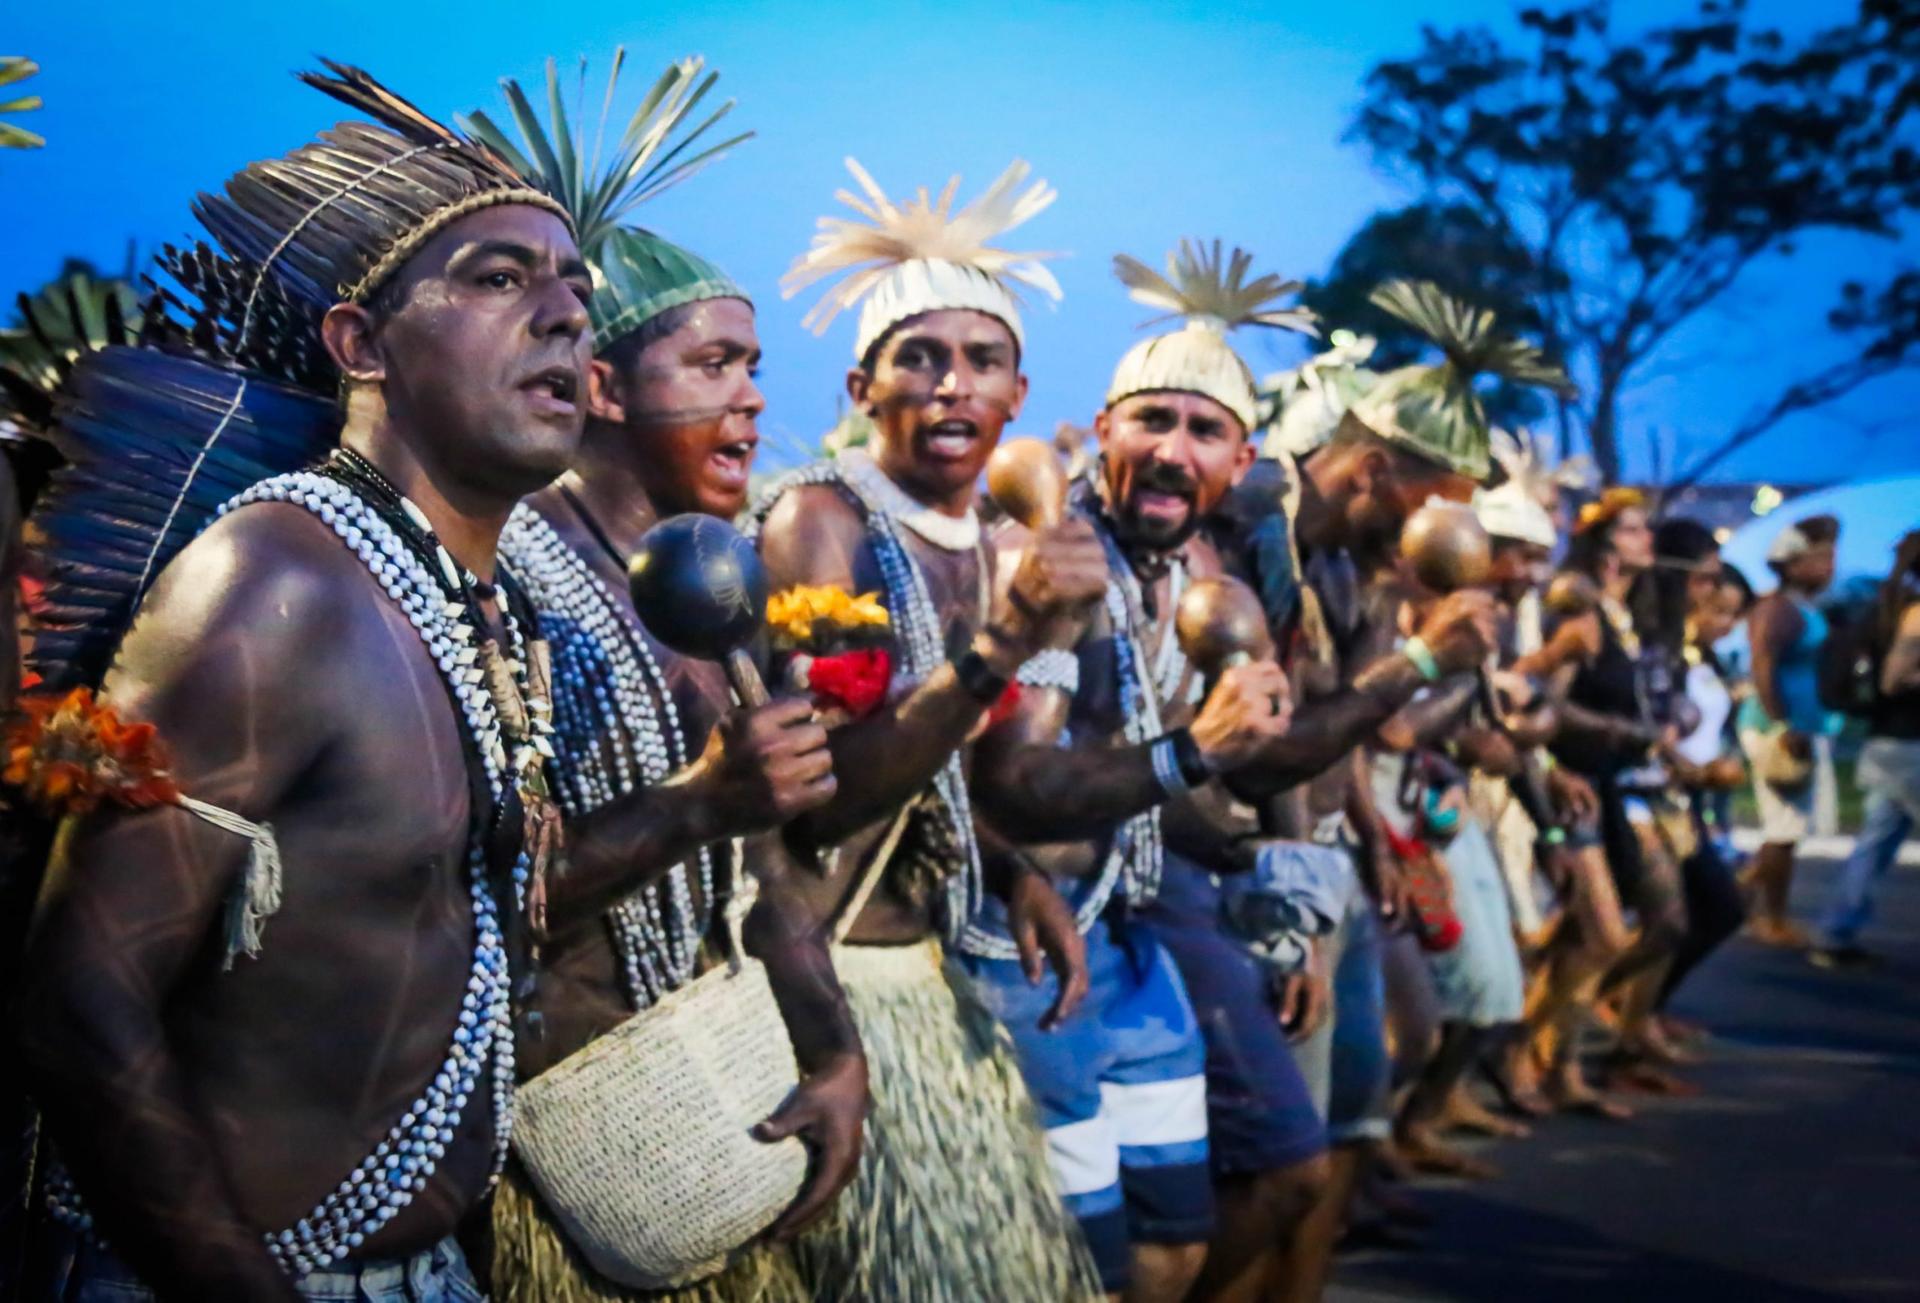 Violence against indigenous peoples growing in Brazil, says Church agency